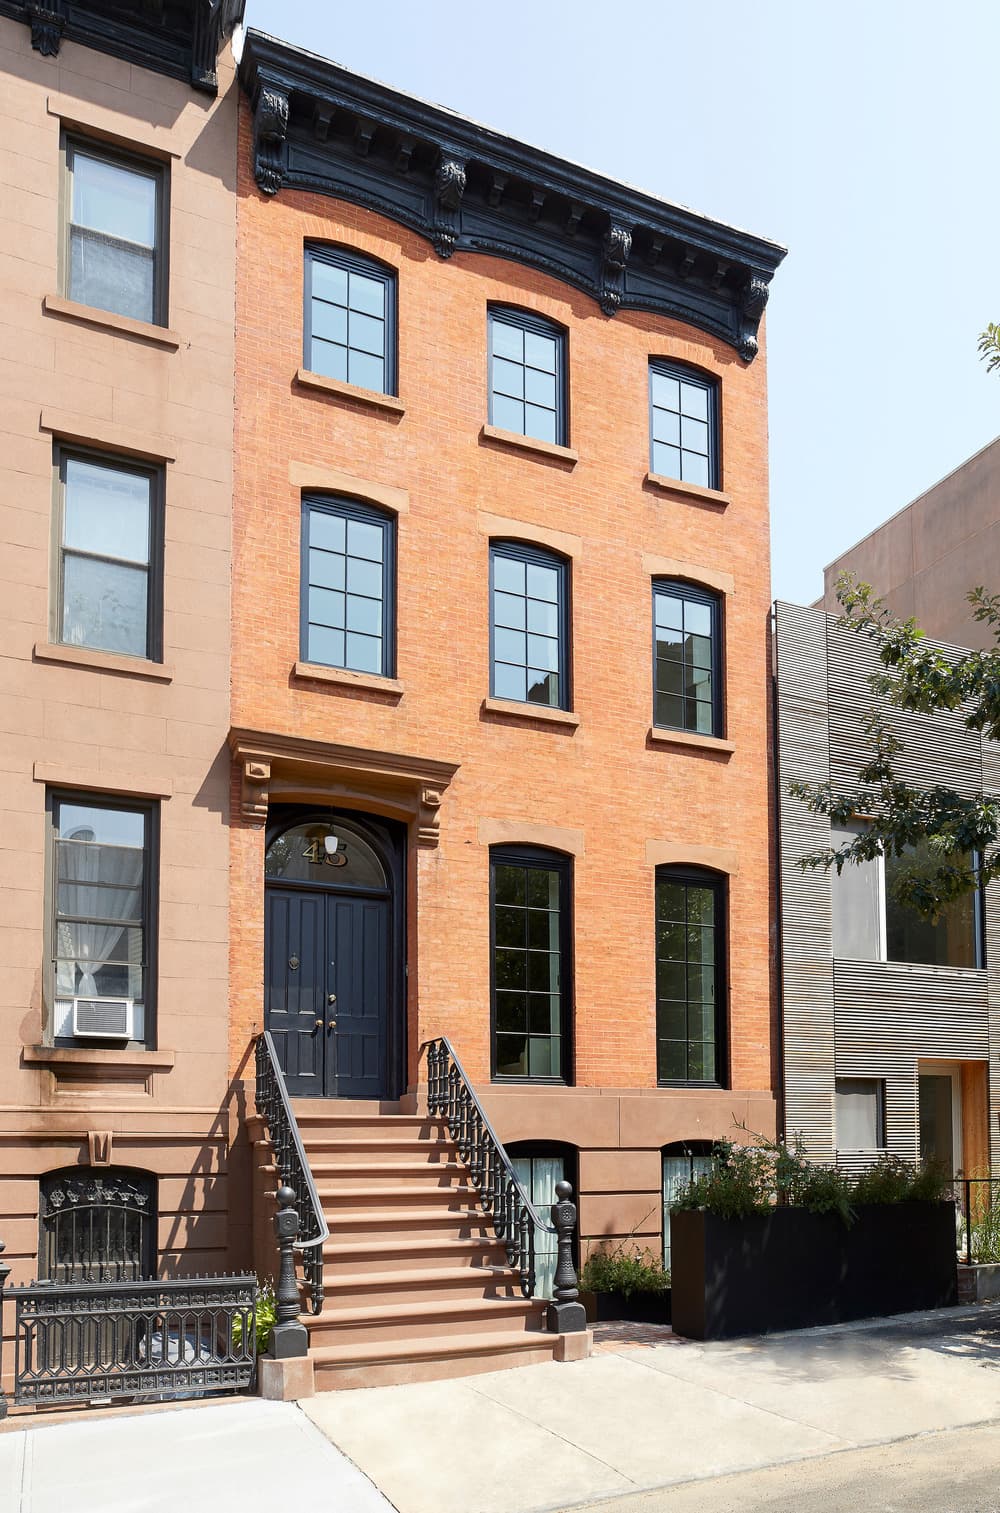 Cube | House in Historic Brownstone Brooklyn, New York